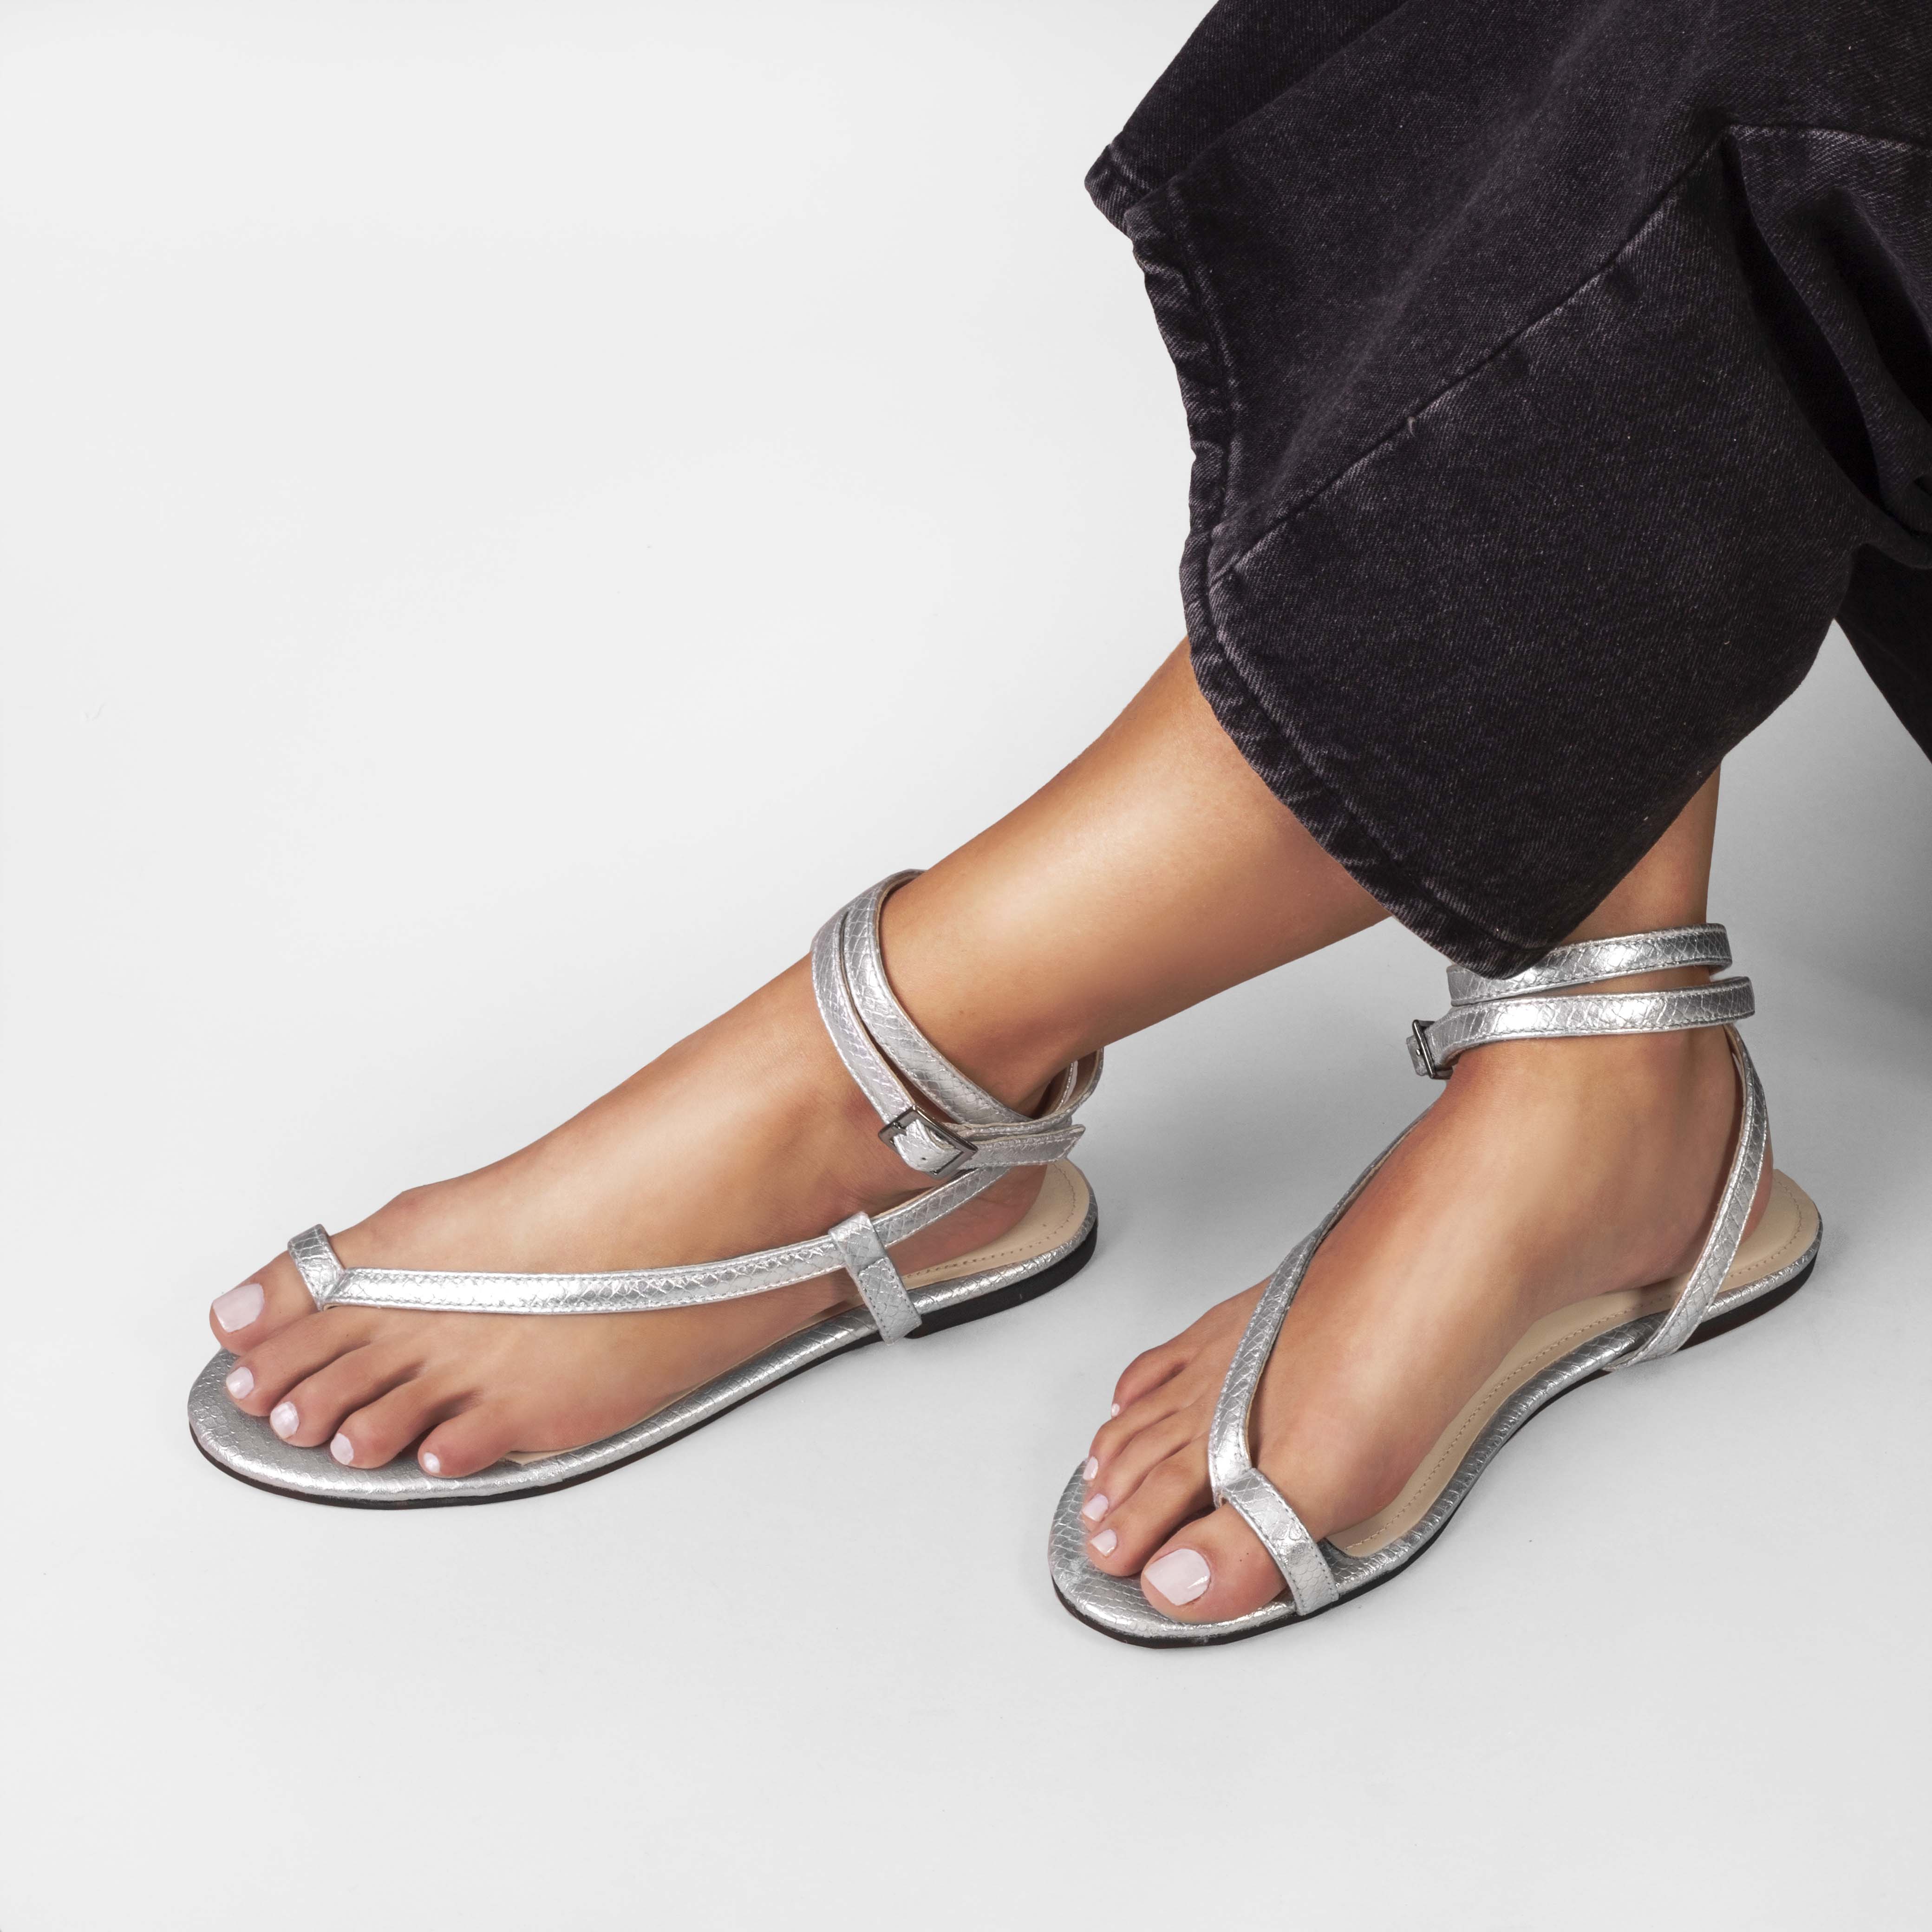 Handmade T-strap sandals Two tone tan silver Leather | The leather craftsmen